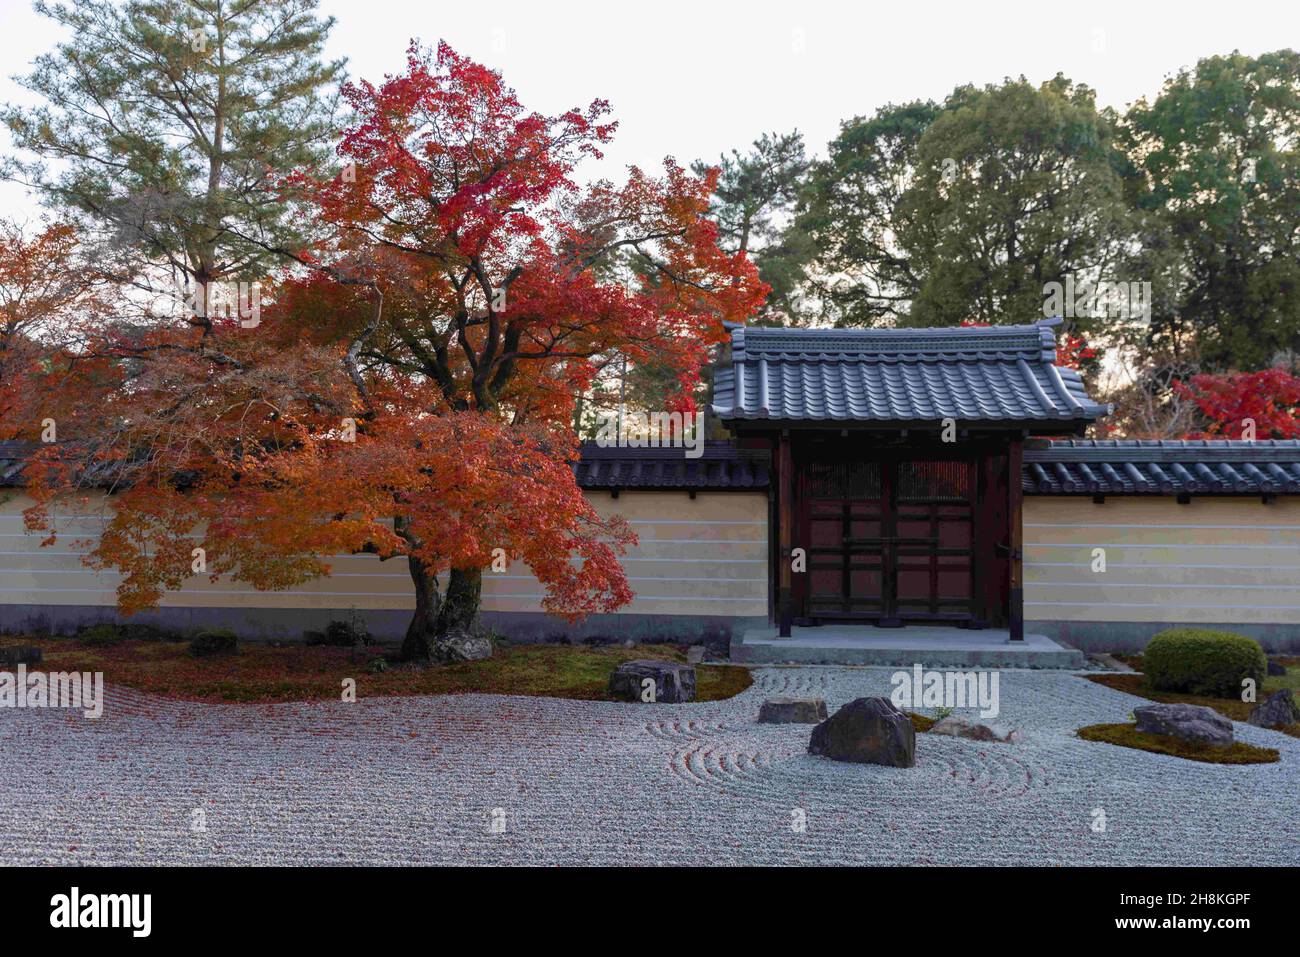 Kyoto, Japan. 26th Nov, 2021. The Zen garden with Momiji tree (Japanese Maple) is seen inside the Toji-in Temple.Toji-in was established in 1341 on the southern slope of Mount Kinugasa by the shogun Ashikaga Takauji. Fifteen shoguns came from the Ashikaga clan making the Toji-in temple rich in historical artifacts and artworks. (Credit Image: © Stanislav Kogiku/SOPA Images via ZUMA Press Wire) Stock Photo